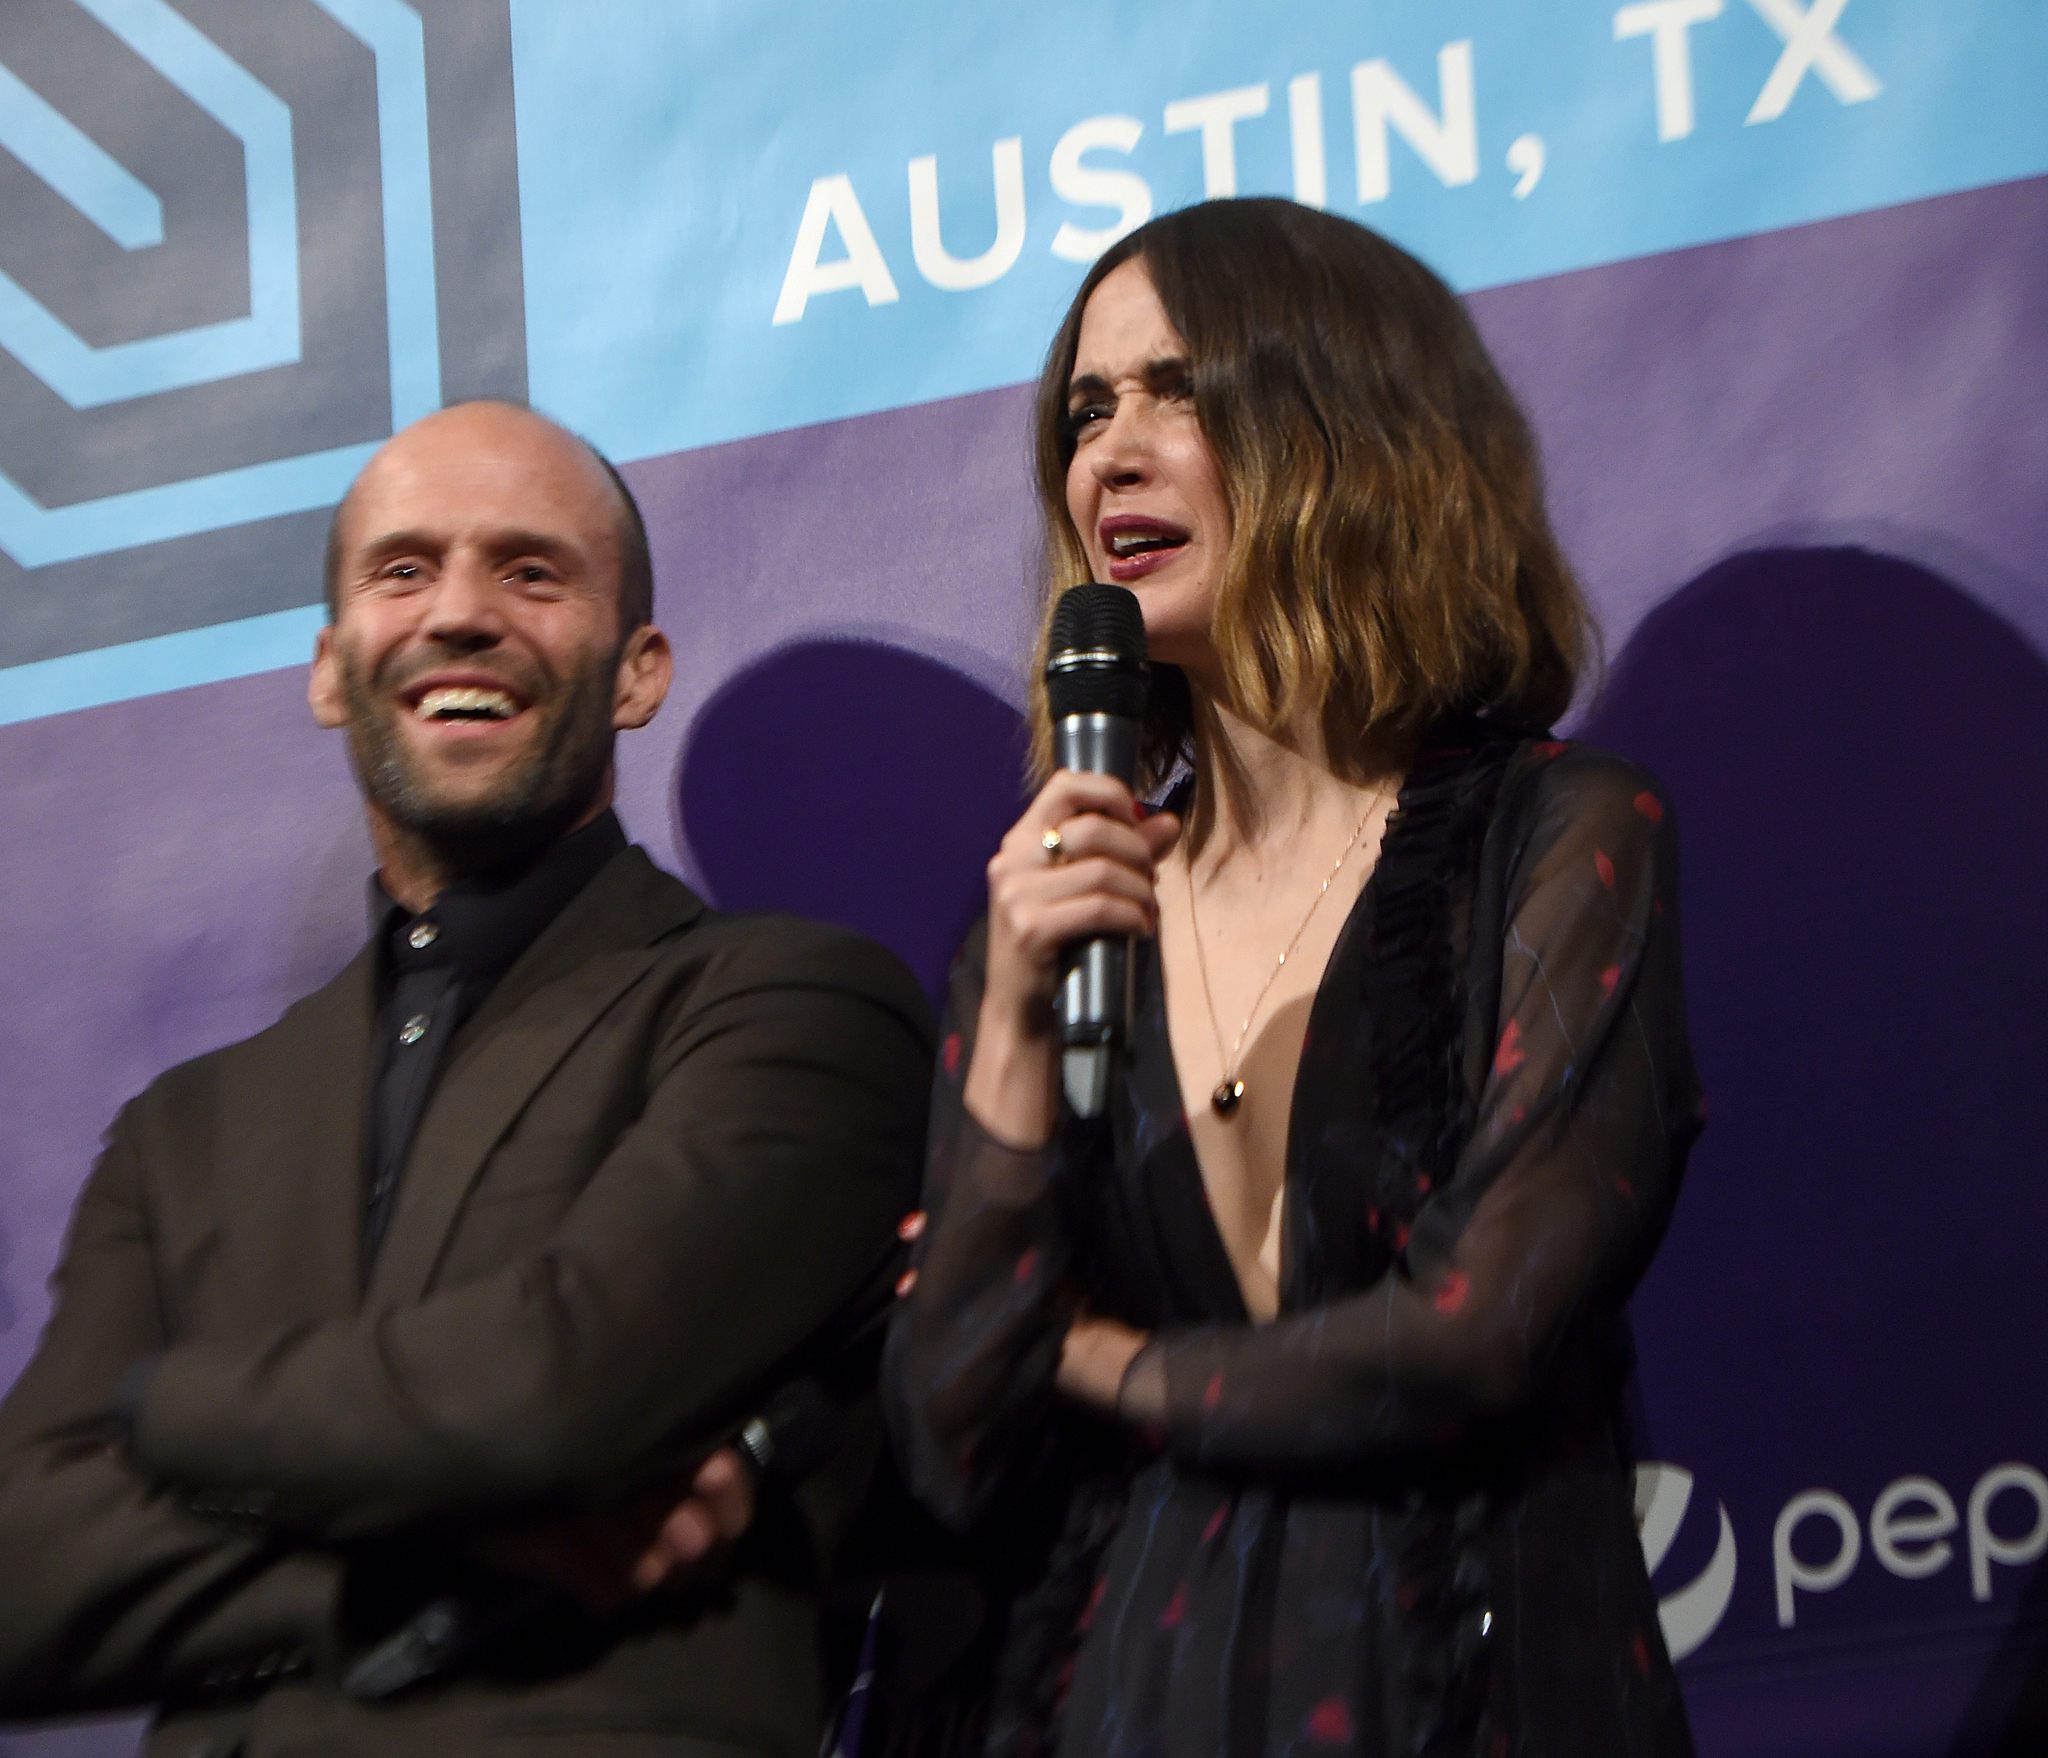 Jason Statham and Rose Byrne at event of Spy (2015)